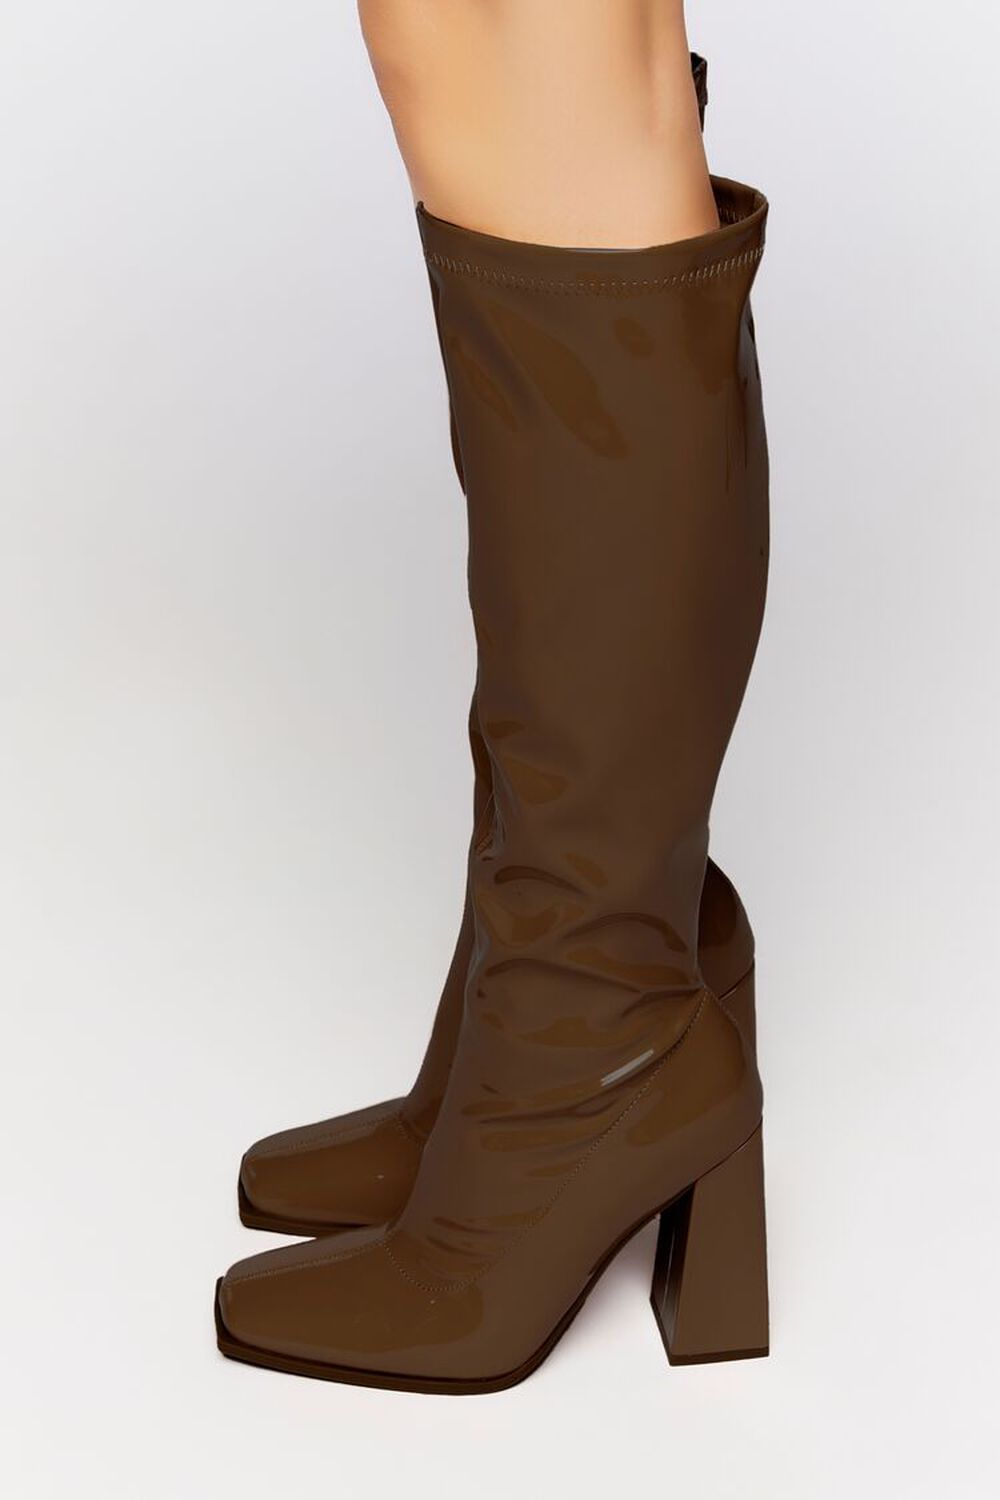 Faux Patent Leather Knee-High Boots, image 2